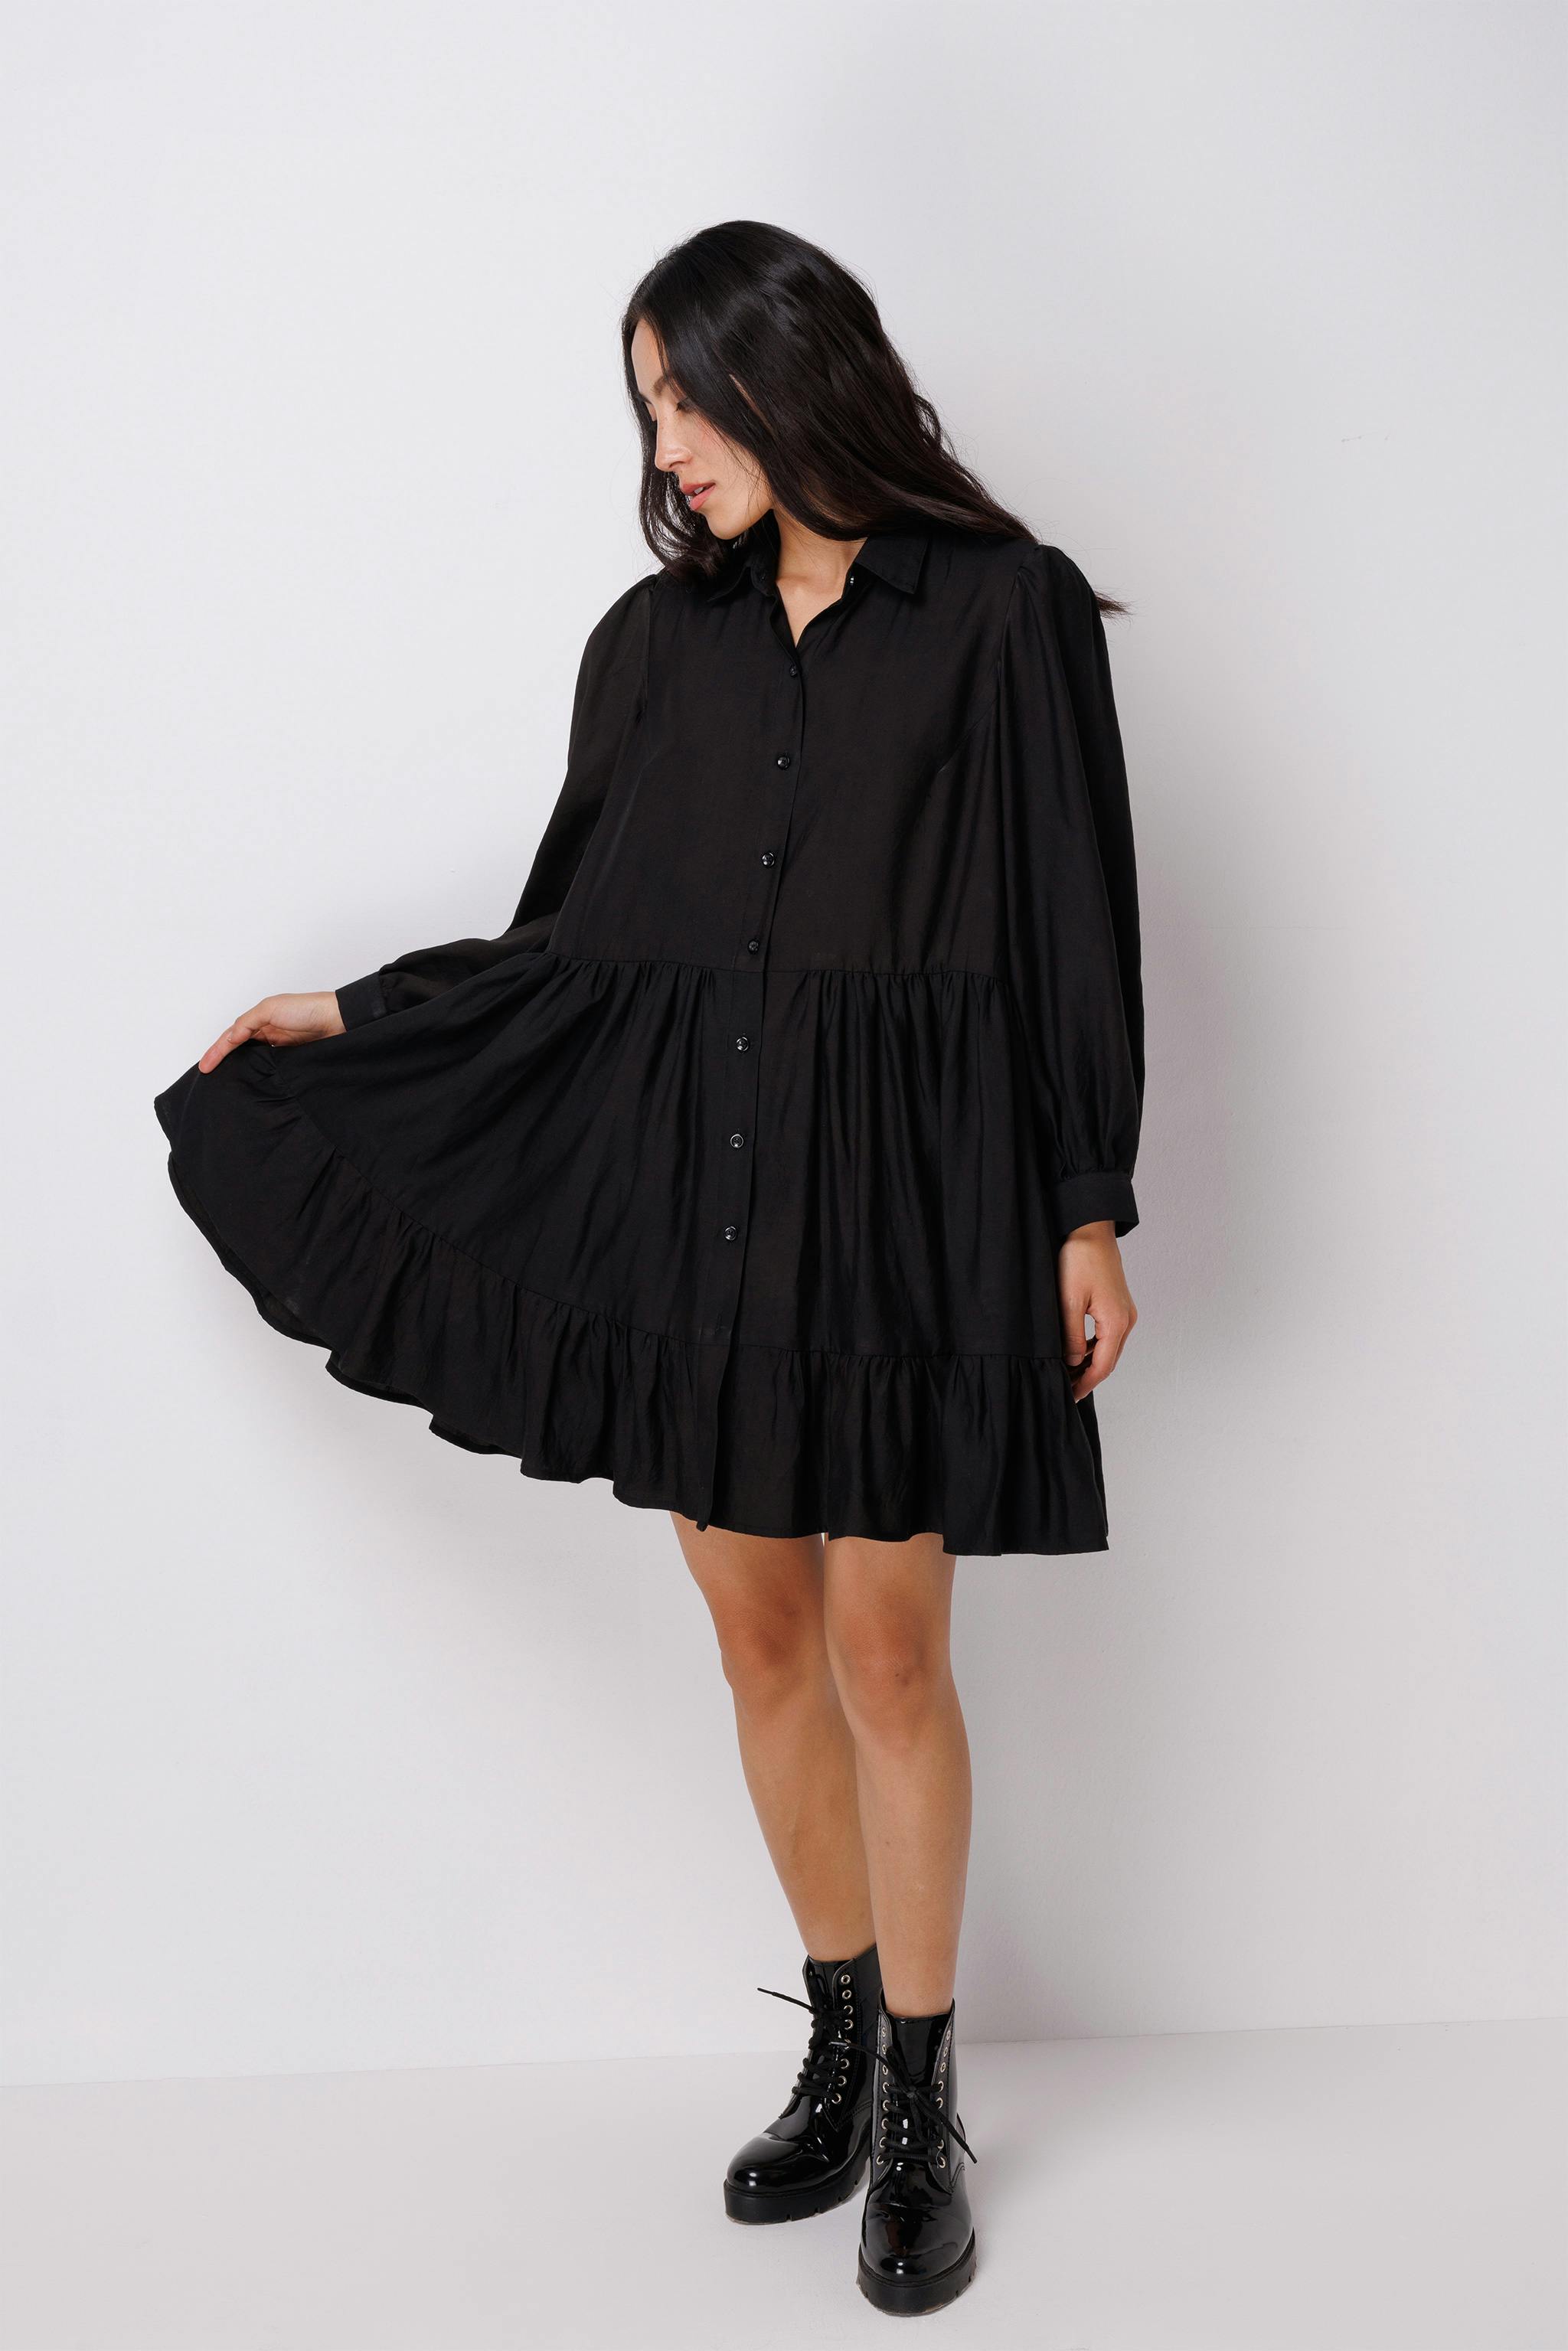 Primary image of Black Frill Dress, a product by House of Sangai